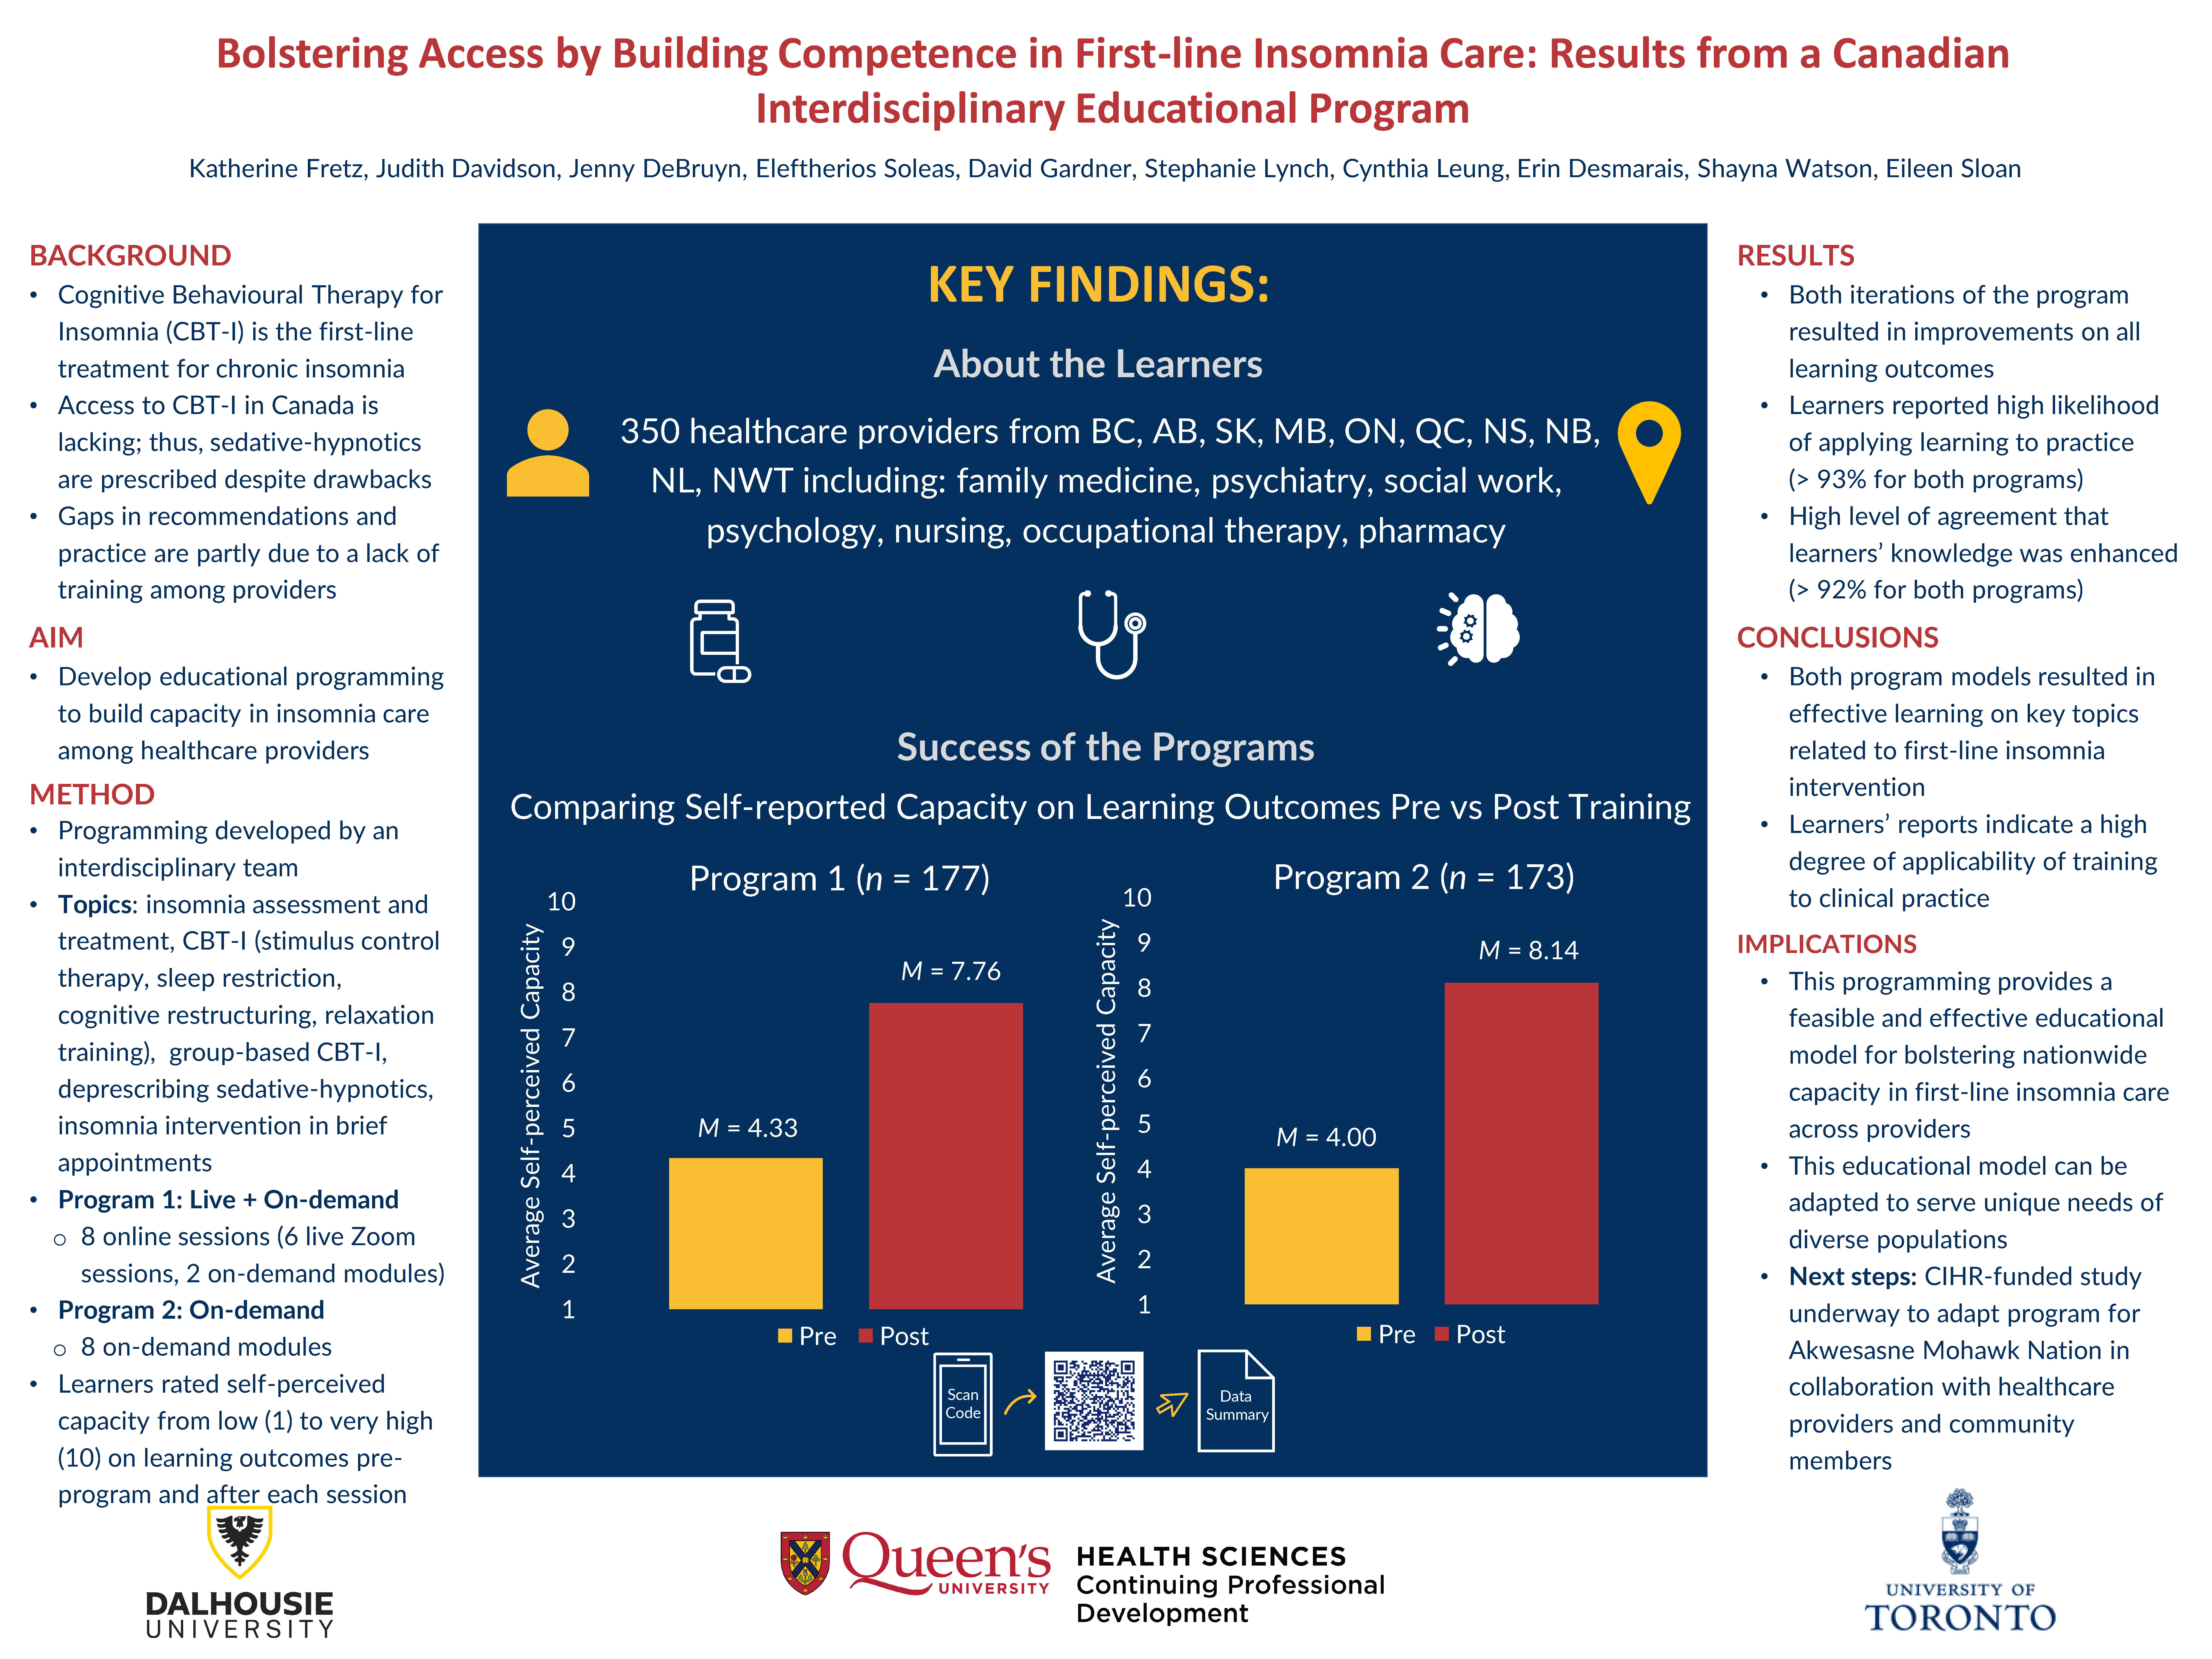 Bolstering Access by Building Competence in First-line Insomnia Care: Results from a Canadian Interdisciplinary Educational Program